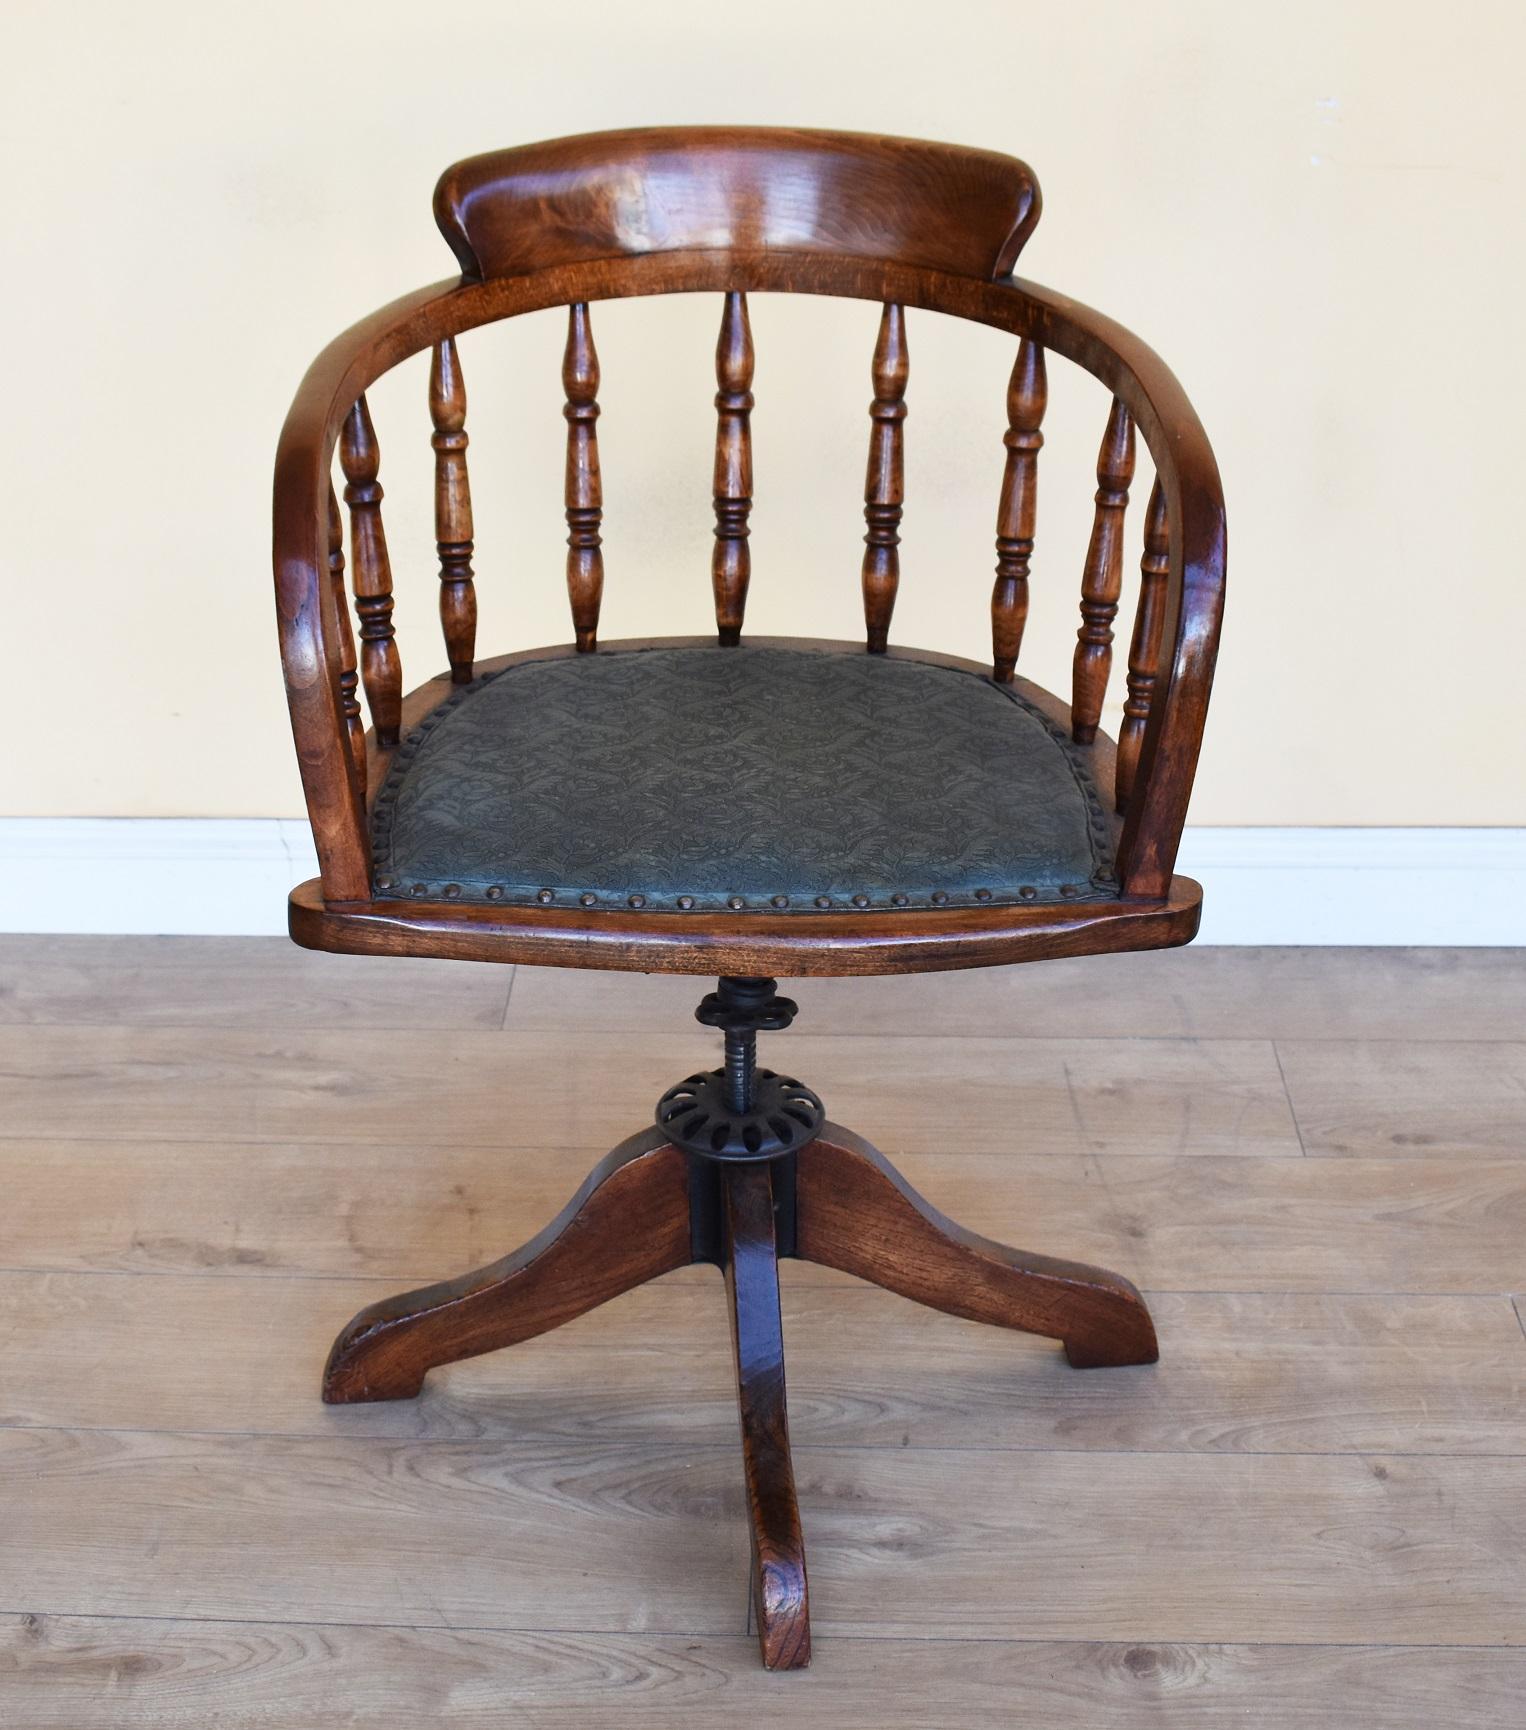 For sale is a good quality Edwardian solid oak Captains chair, having turned spindles in the back, above a green upholstered seat, raised on an adjustable base terminating on four legs. The chair is in very good, original condition. 

Measures: